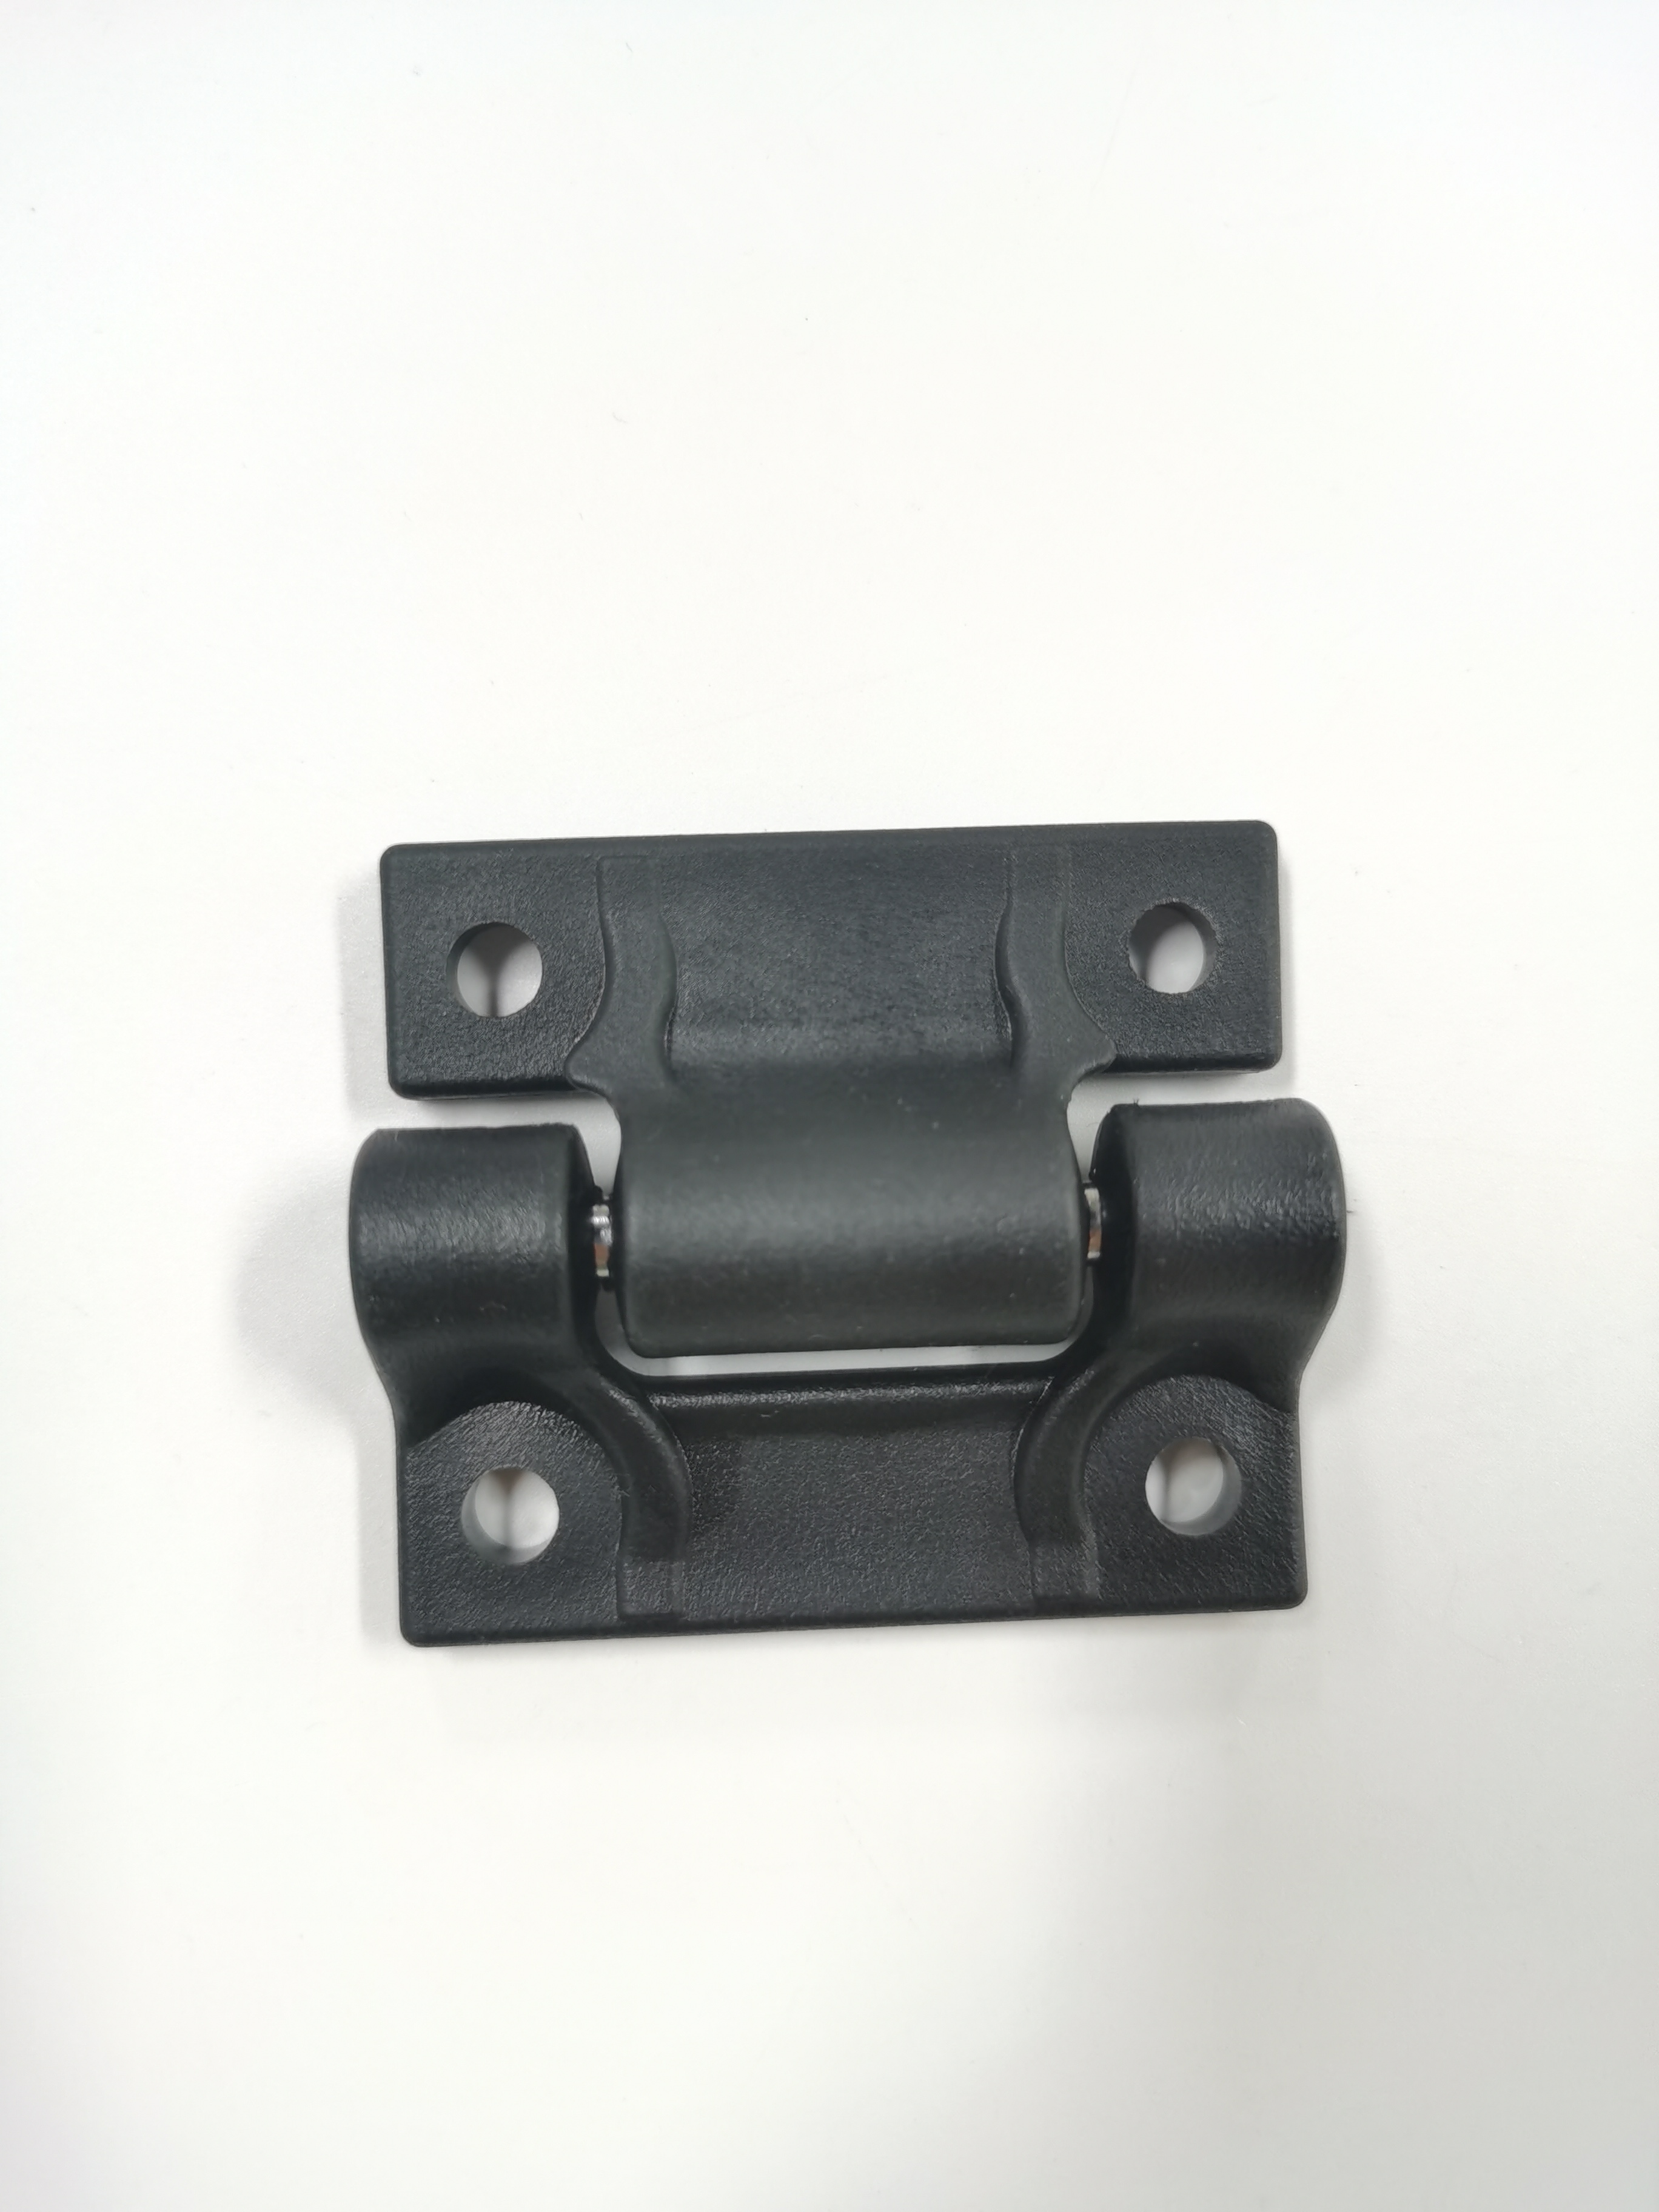 Constant torque friction hinges TRD-TF14